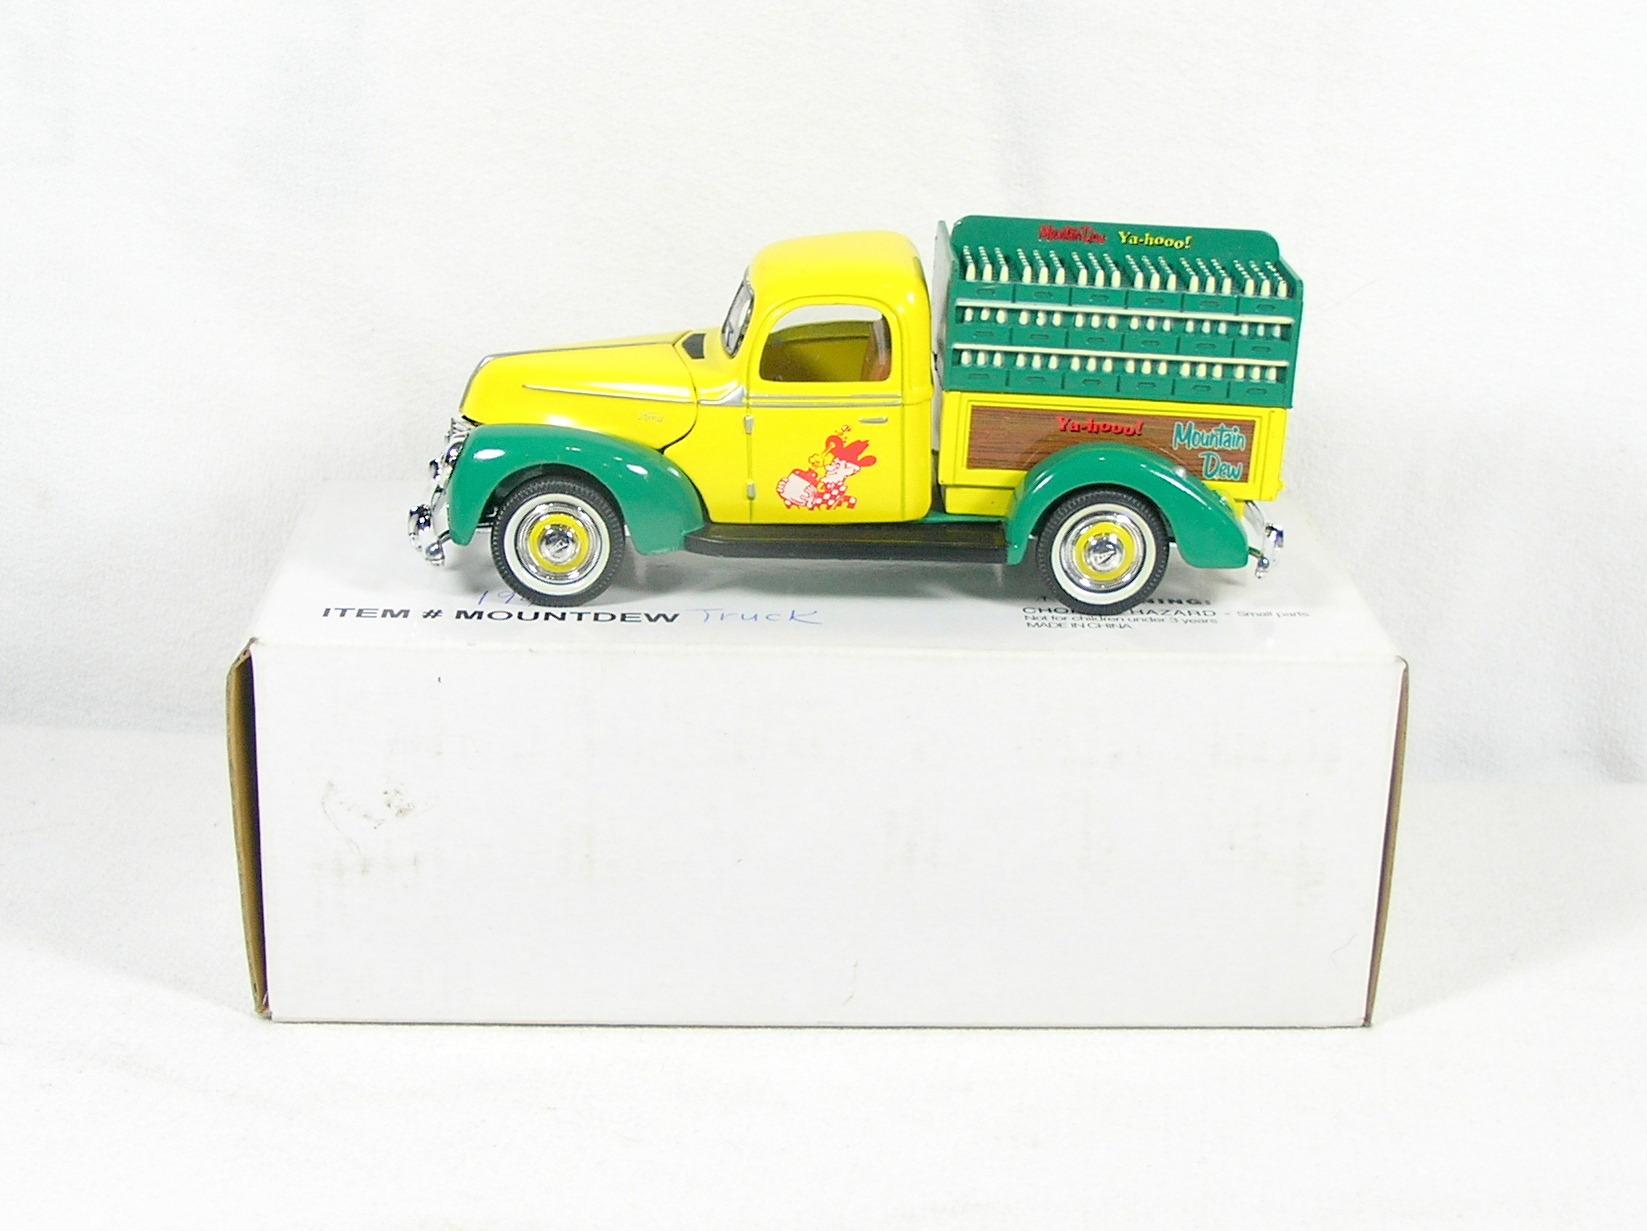 Diecast Replica of 1940 Ford Mountain Dew Delivery Truck from Signature Mod